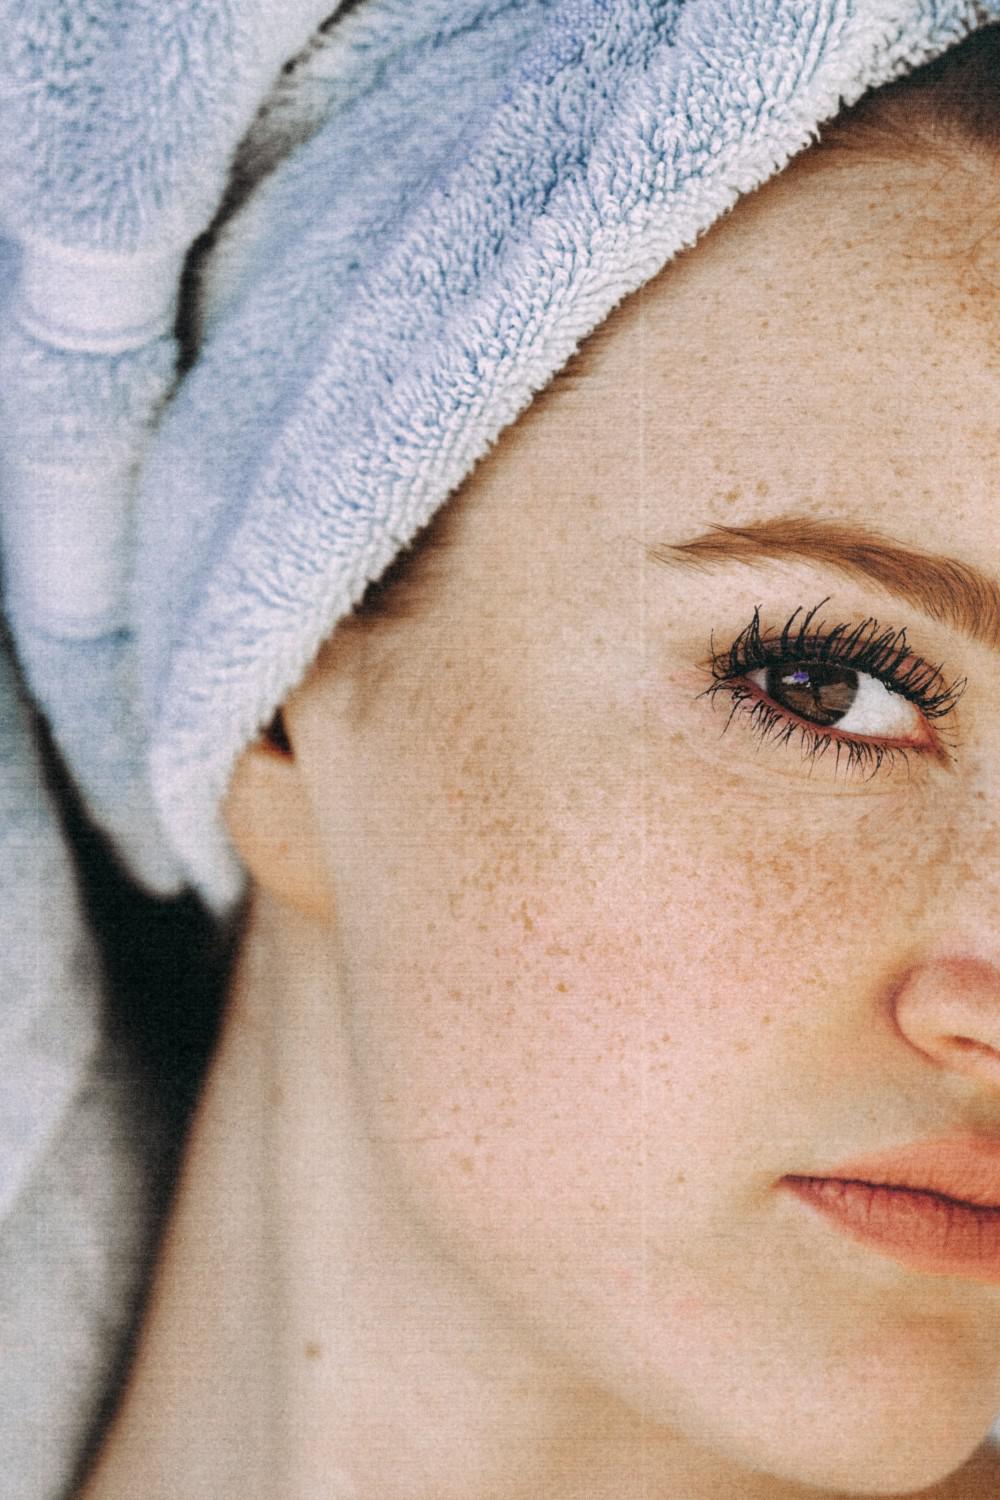 Why You Shouldn’t Try Microneedling at Home